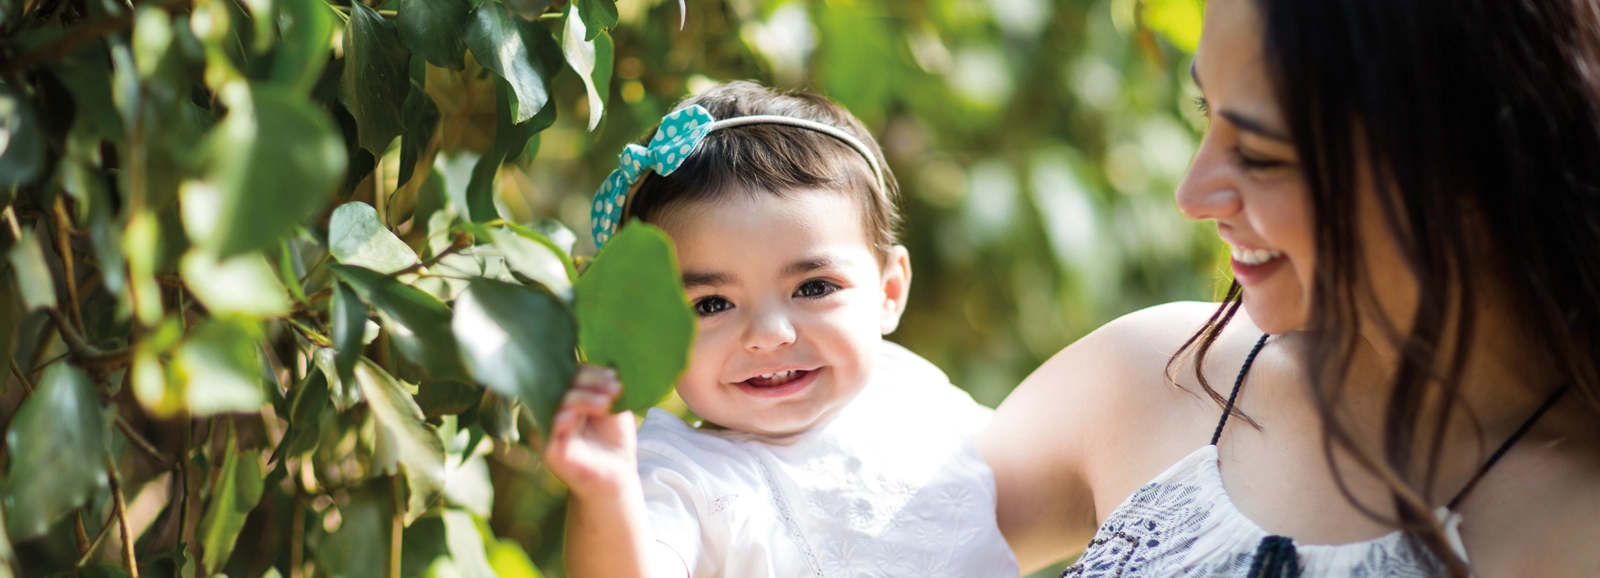 woman-and-baby-smiling-outside-1600x578.webp